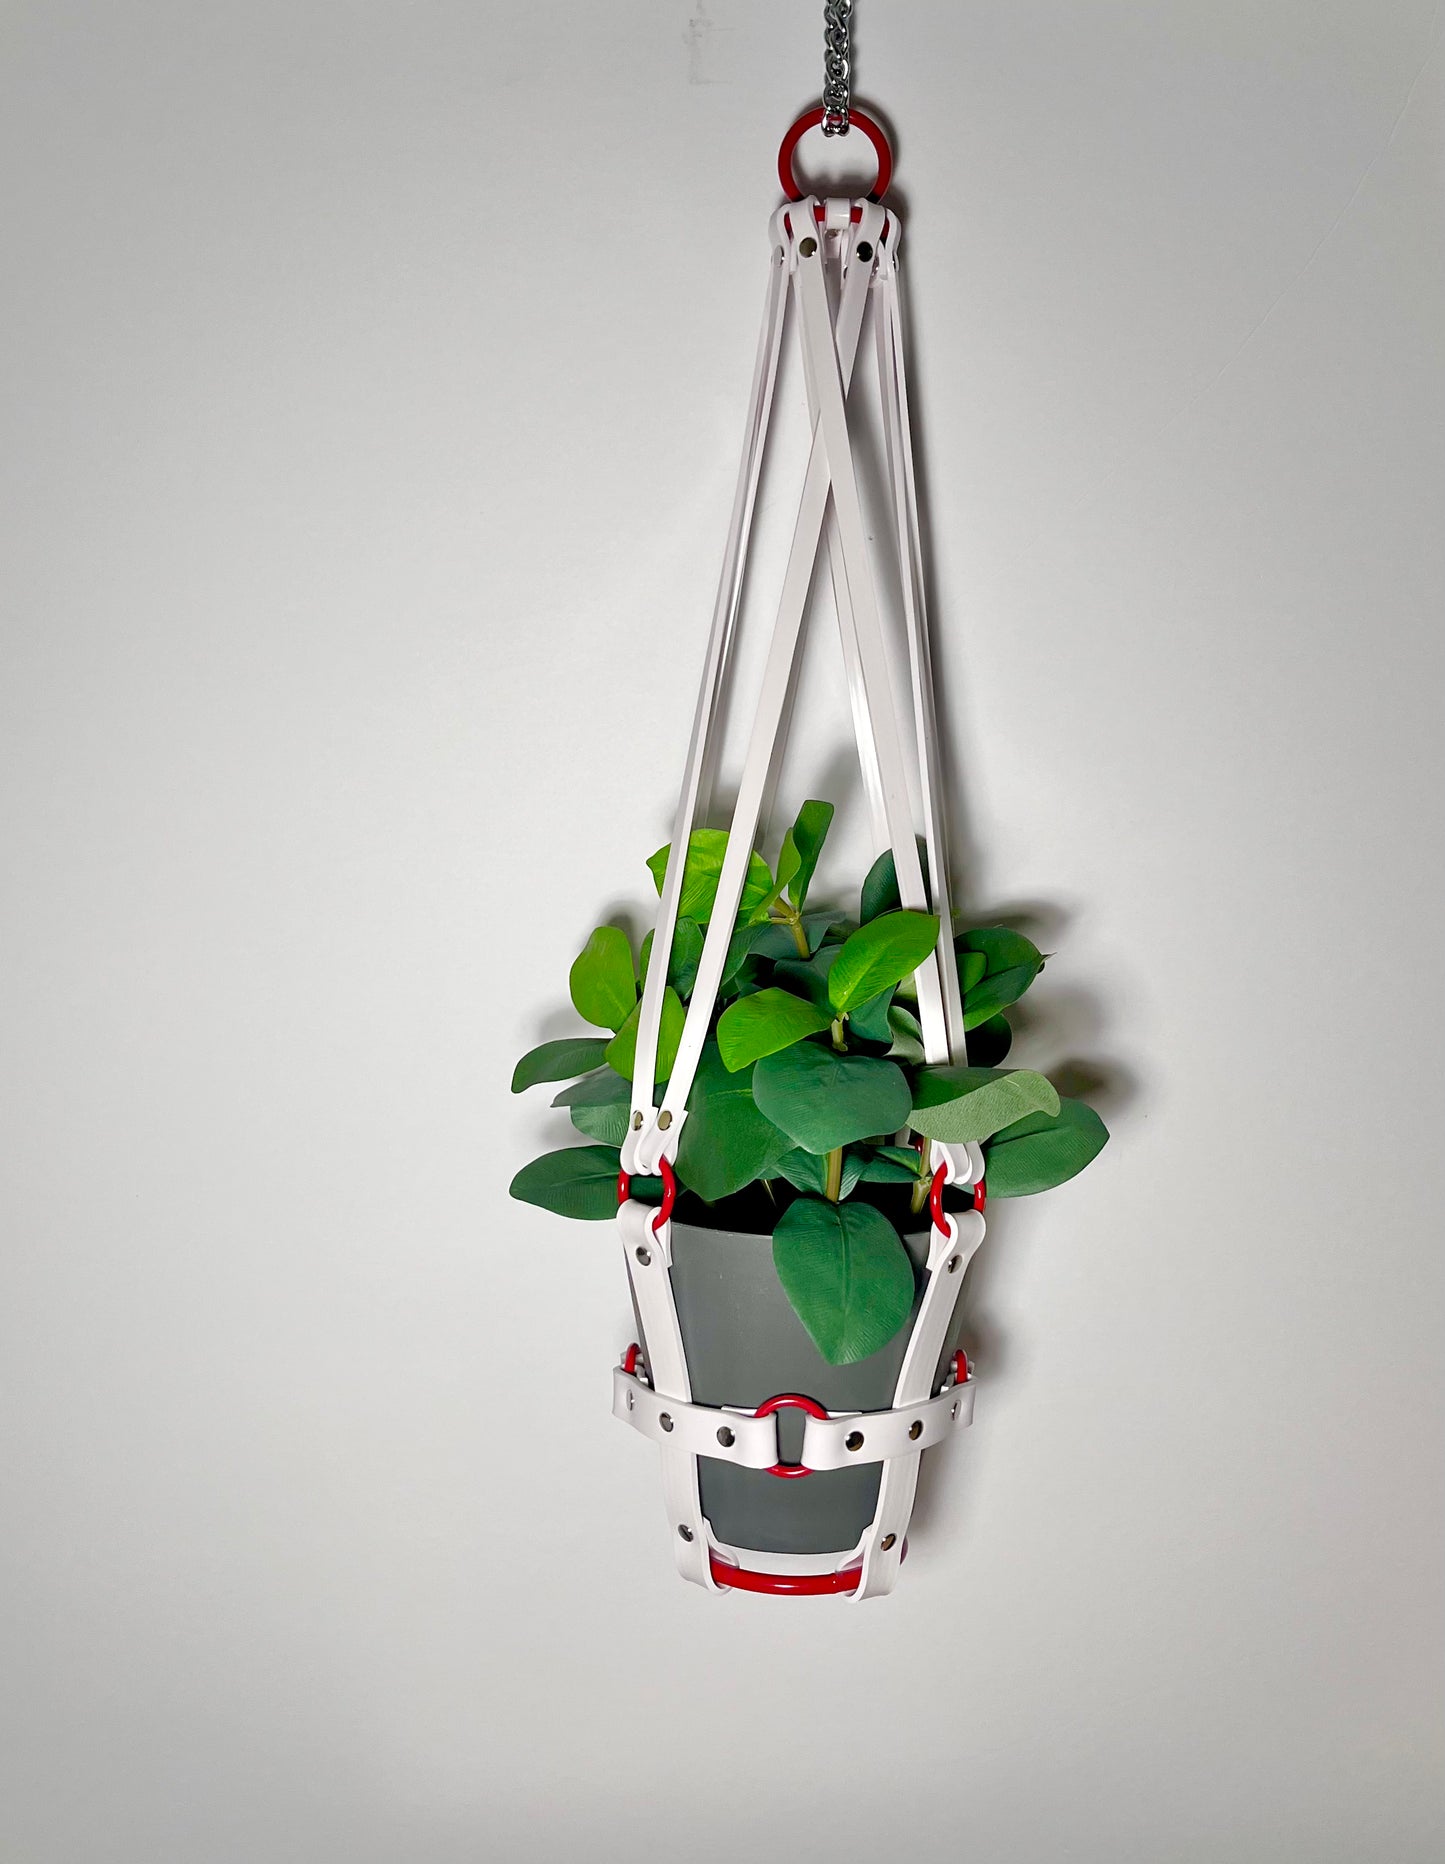 Basic Bitch 6" Plant Hanger with Red Rings